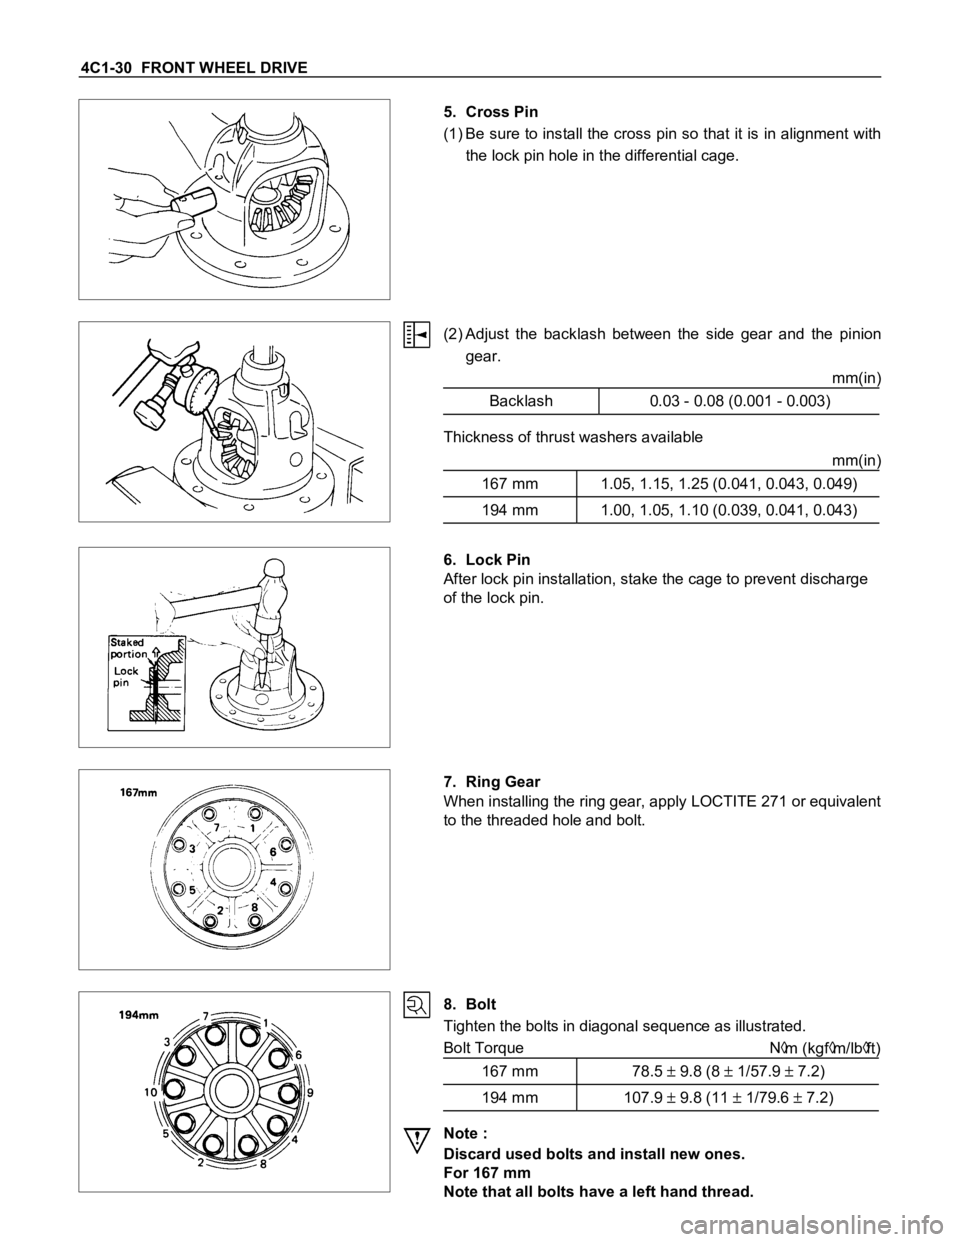 ISUZU TFS SERIES 1997  Workshop Manual 4C1-30  FRONT WHEEL DRIVE
5. Cross Pin
(1) Be sure to install the cross pin so that  it is in alignment with
the lock pin hole in the differential cage.
(2) Adjust  the  backlash  between  the  side  